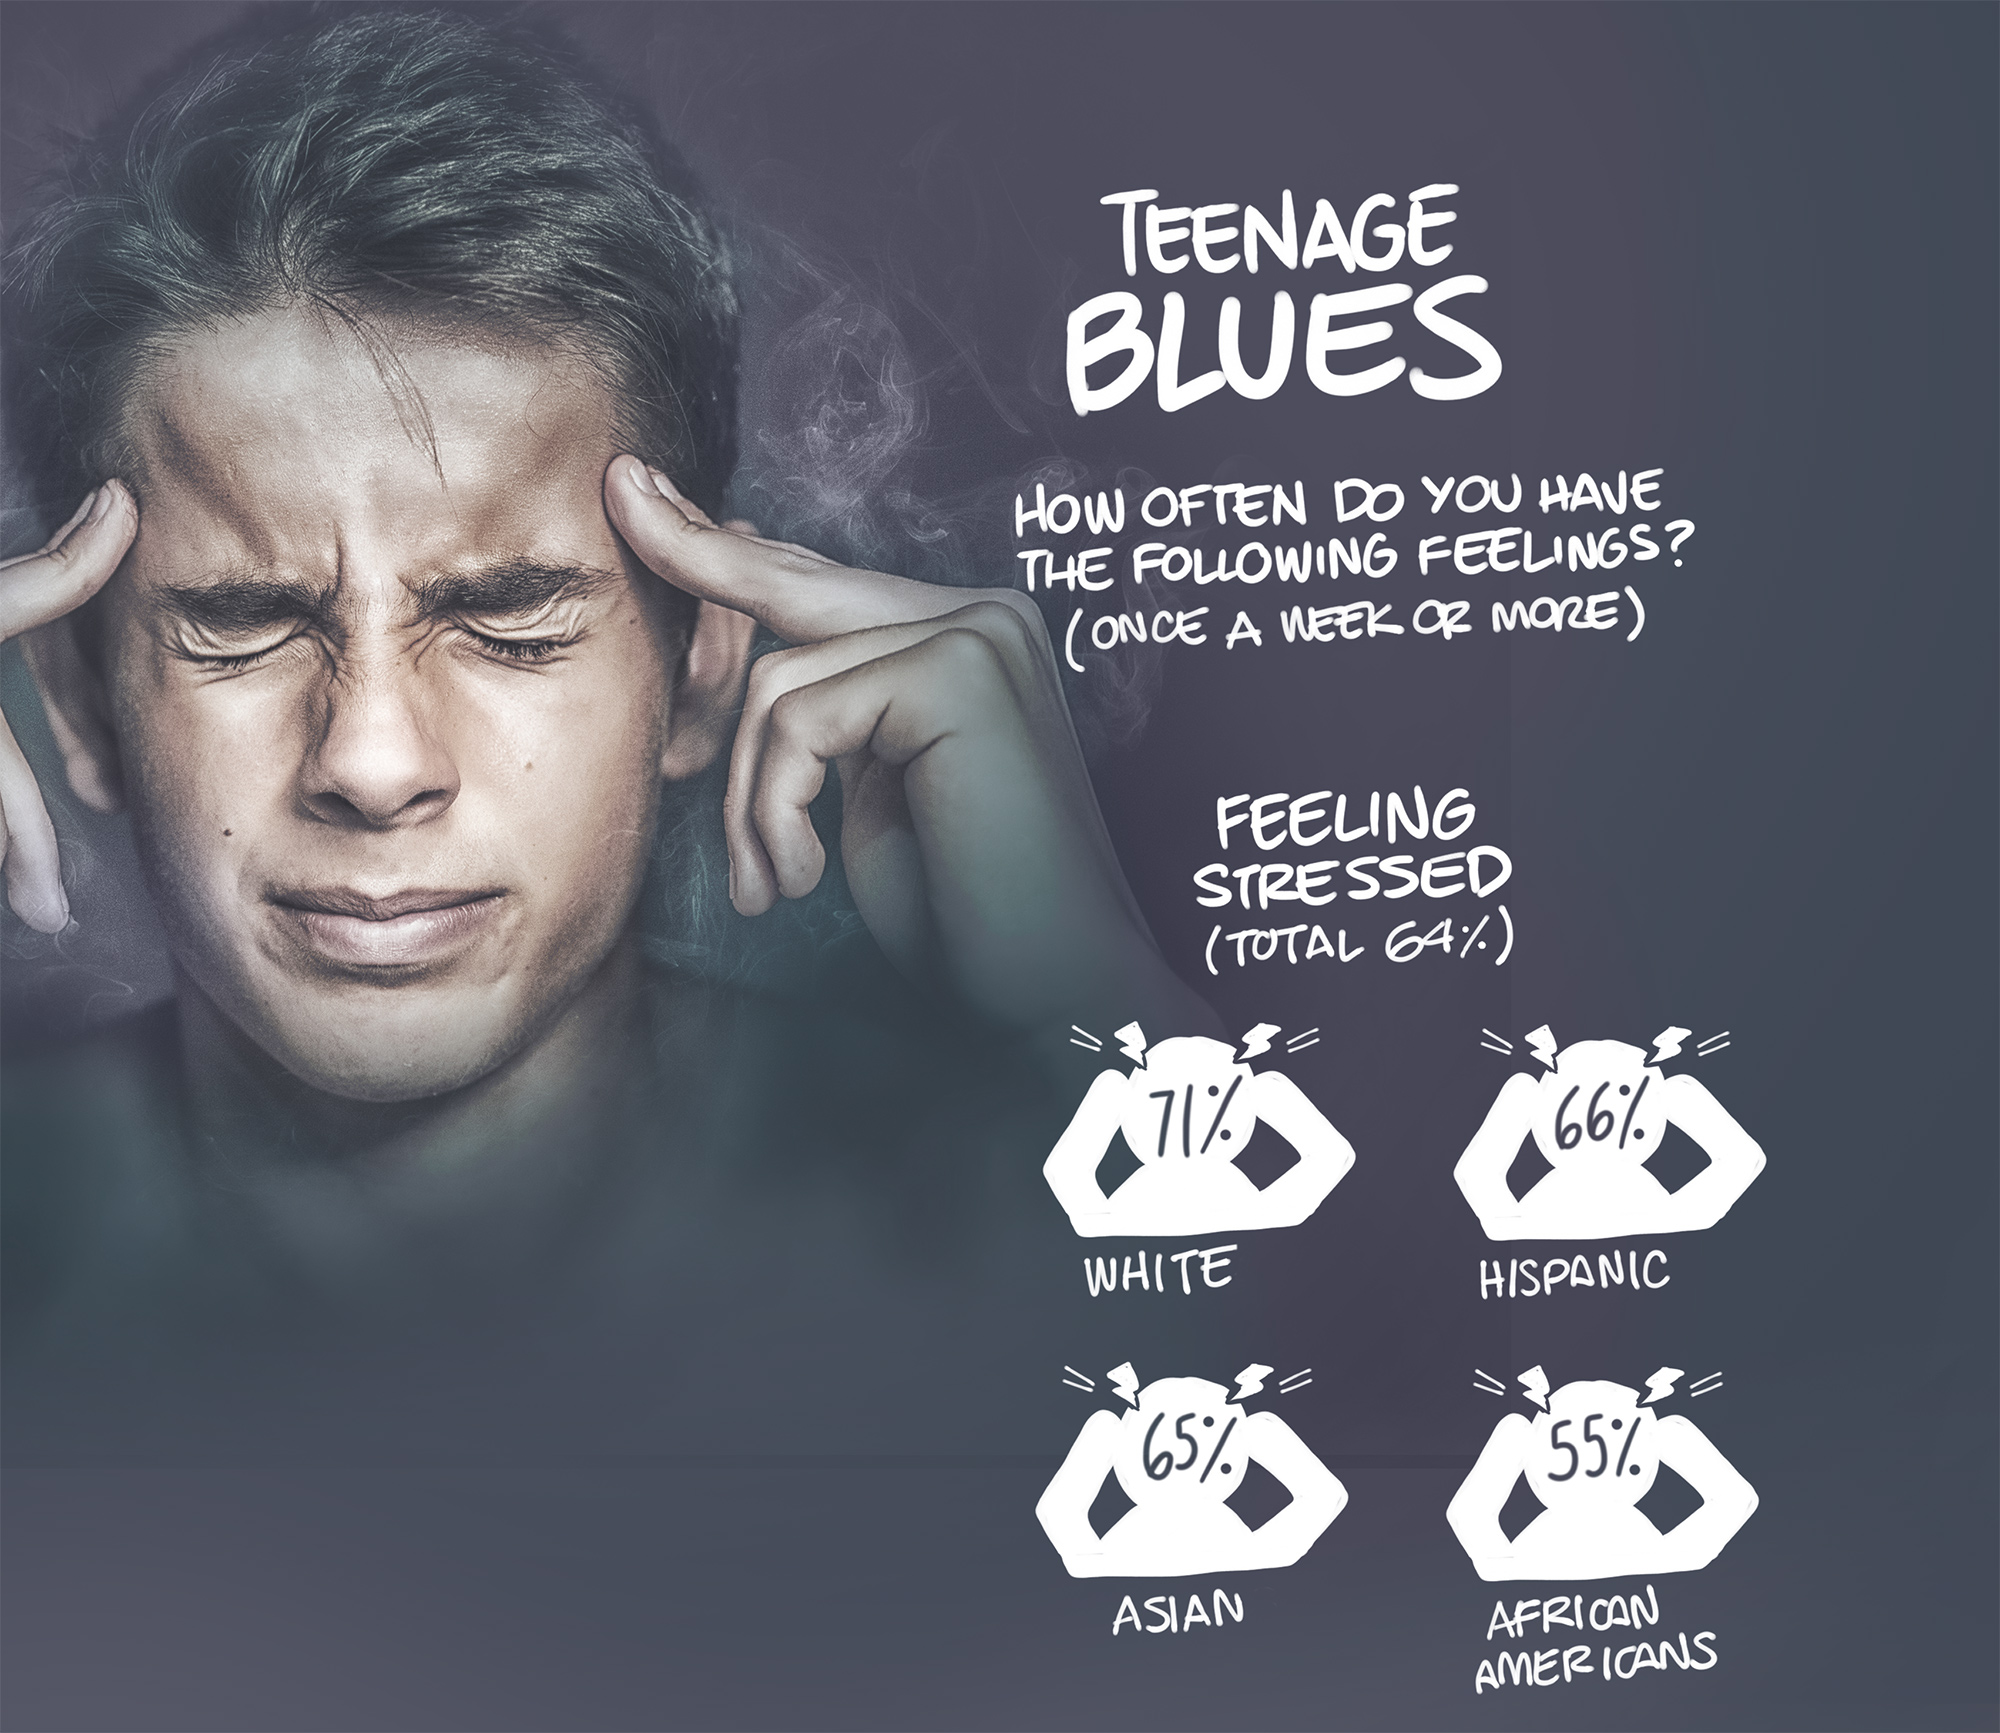 Teenage blues. How often do you have the following feelings? (once a week or more). Feeling stressed (Total 64%). White 71%. Hispanic 66%. Asian 65%. African Americans 55%